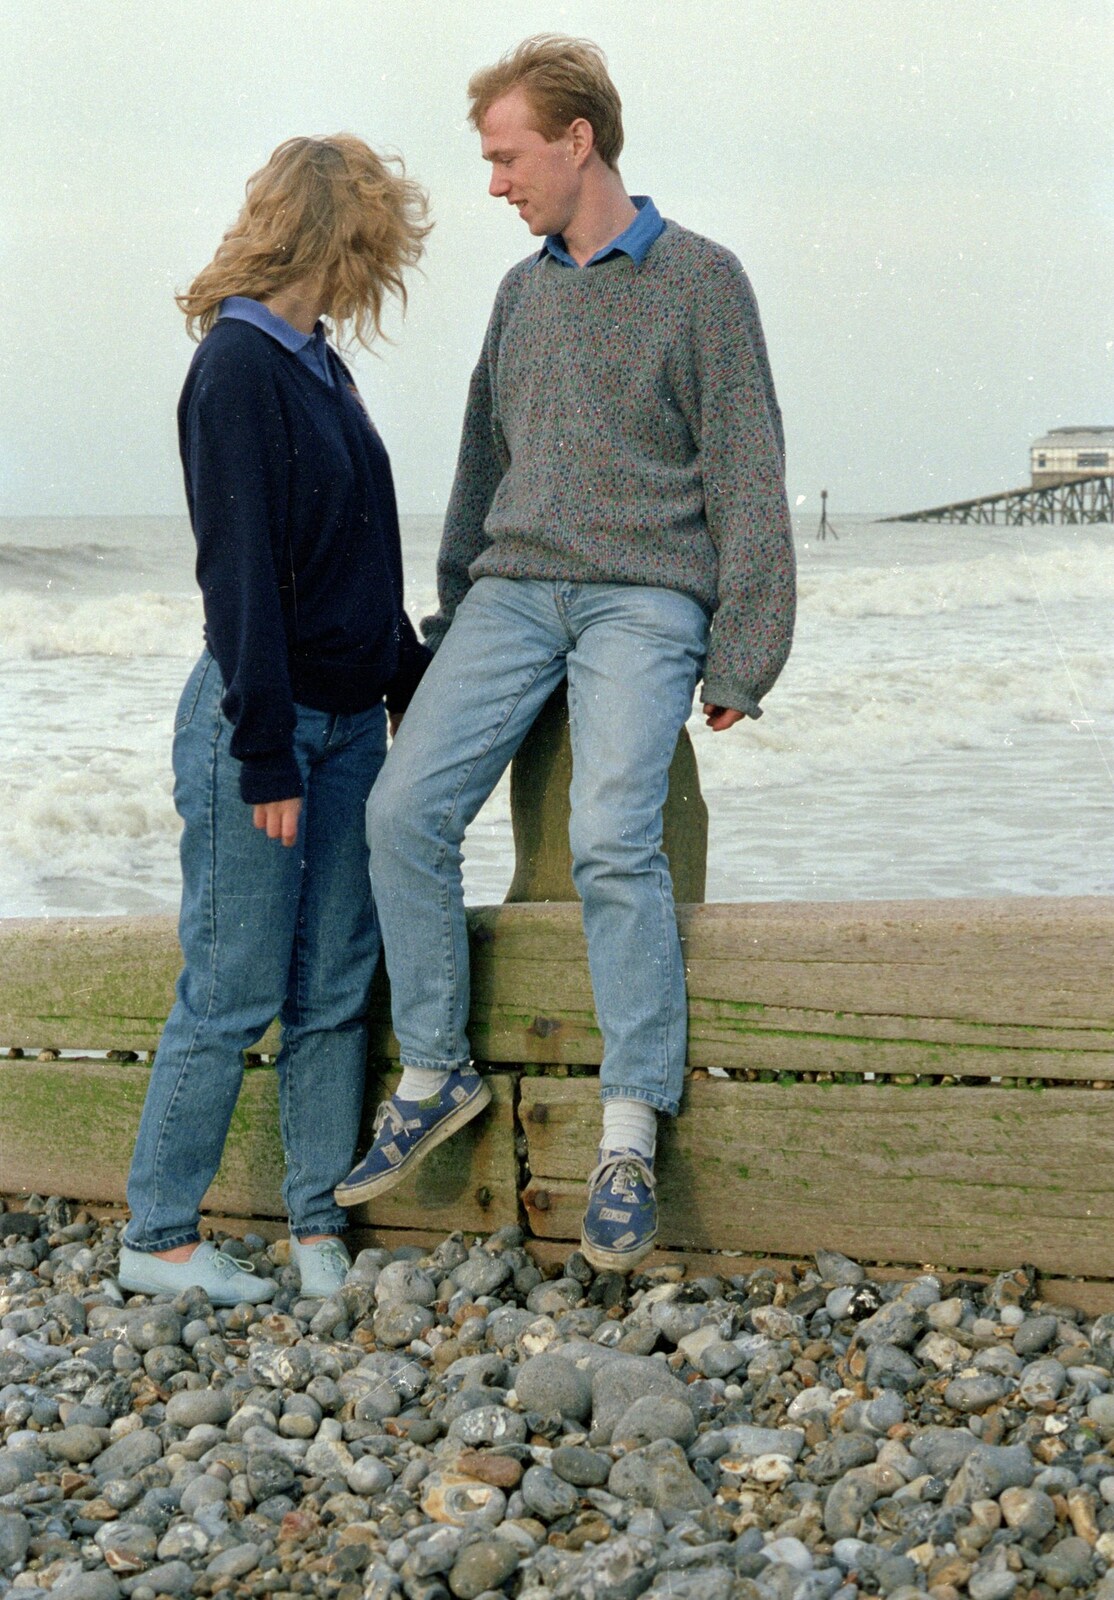 Emma and Martin, and Cromer pier from A Trip to the Beach, East Runton, Norfolk - 6th July 1988